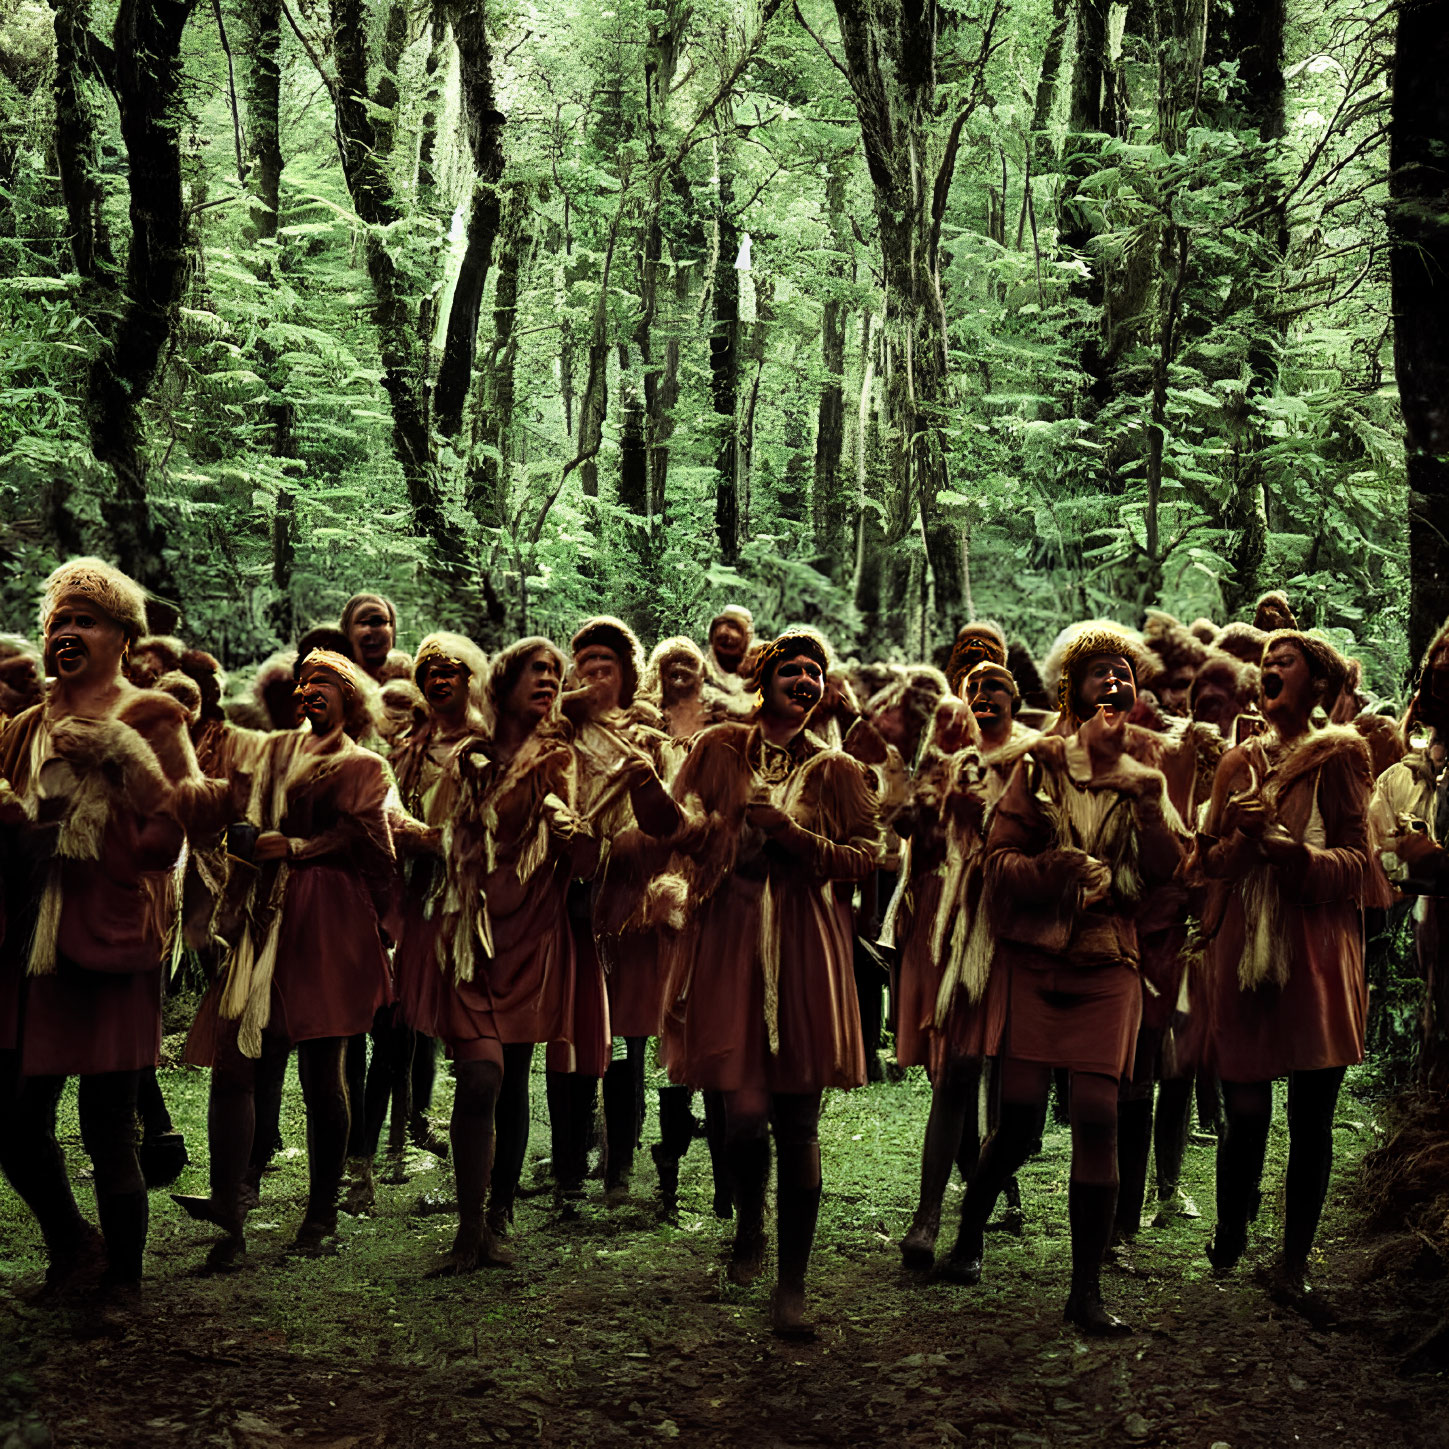 Group in traditional garb dancing in lush forest.